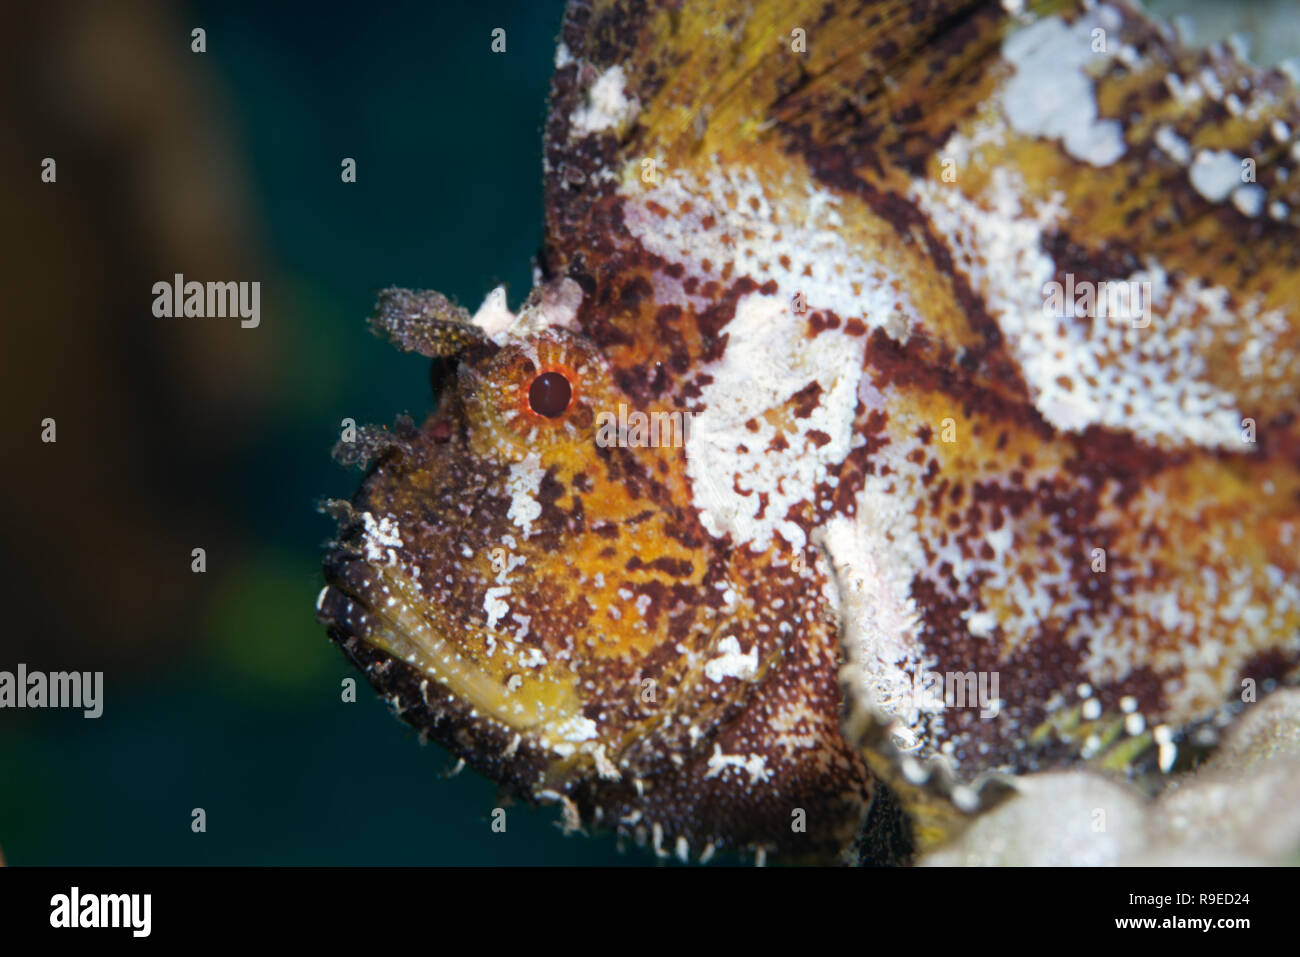 Portrait of a leaf scorpionfish in the indonesian waters Stock Photo